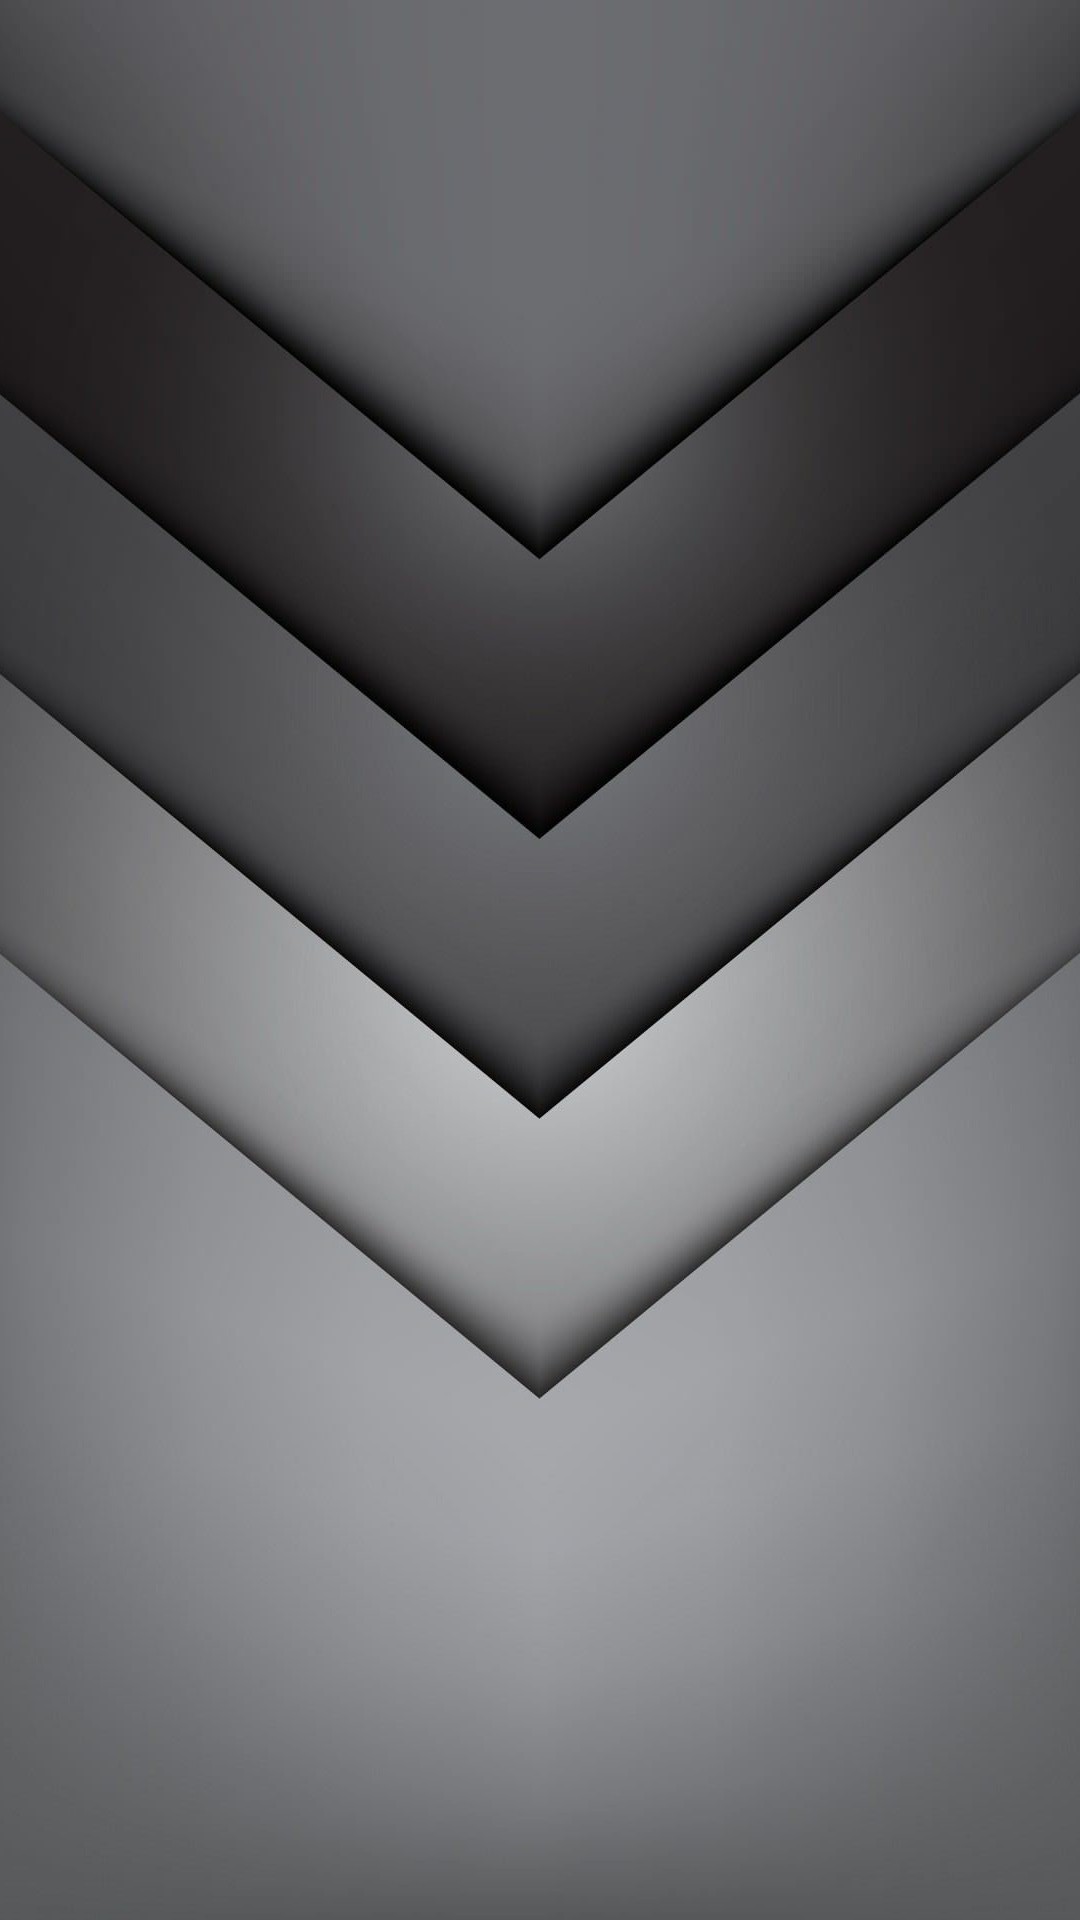 Wallpaper Android Foil with HD resolution 1080x1920